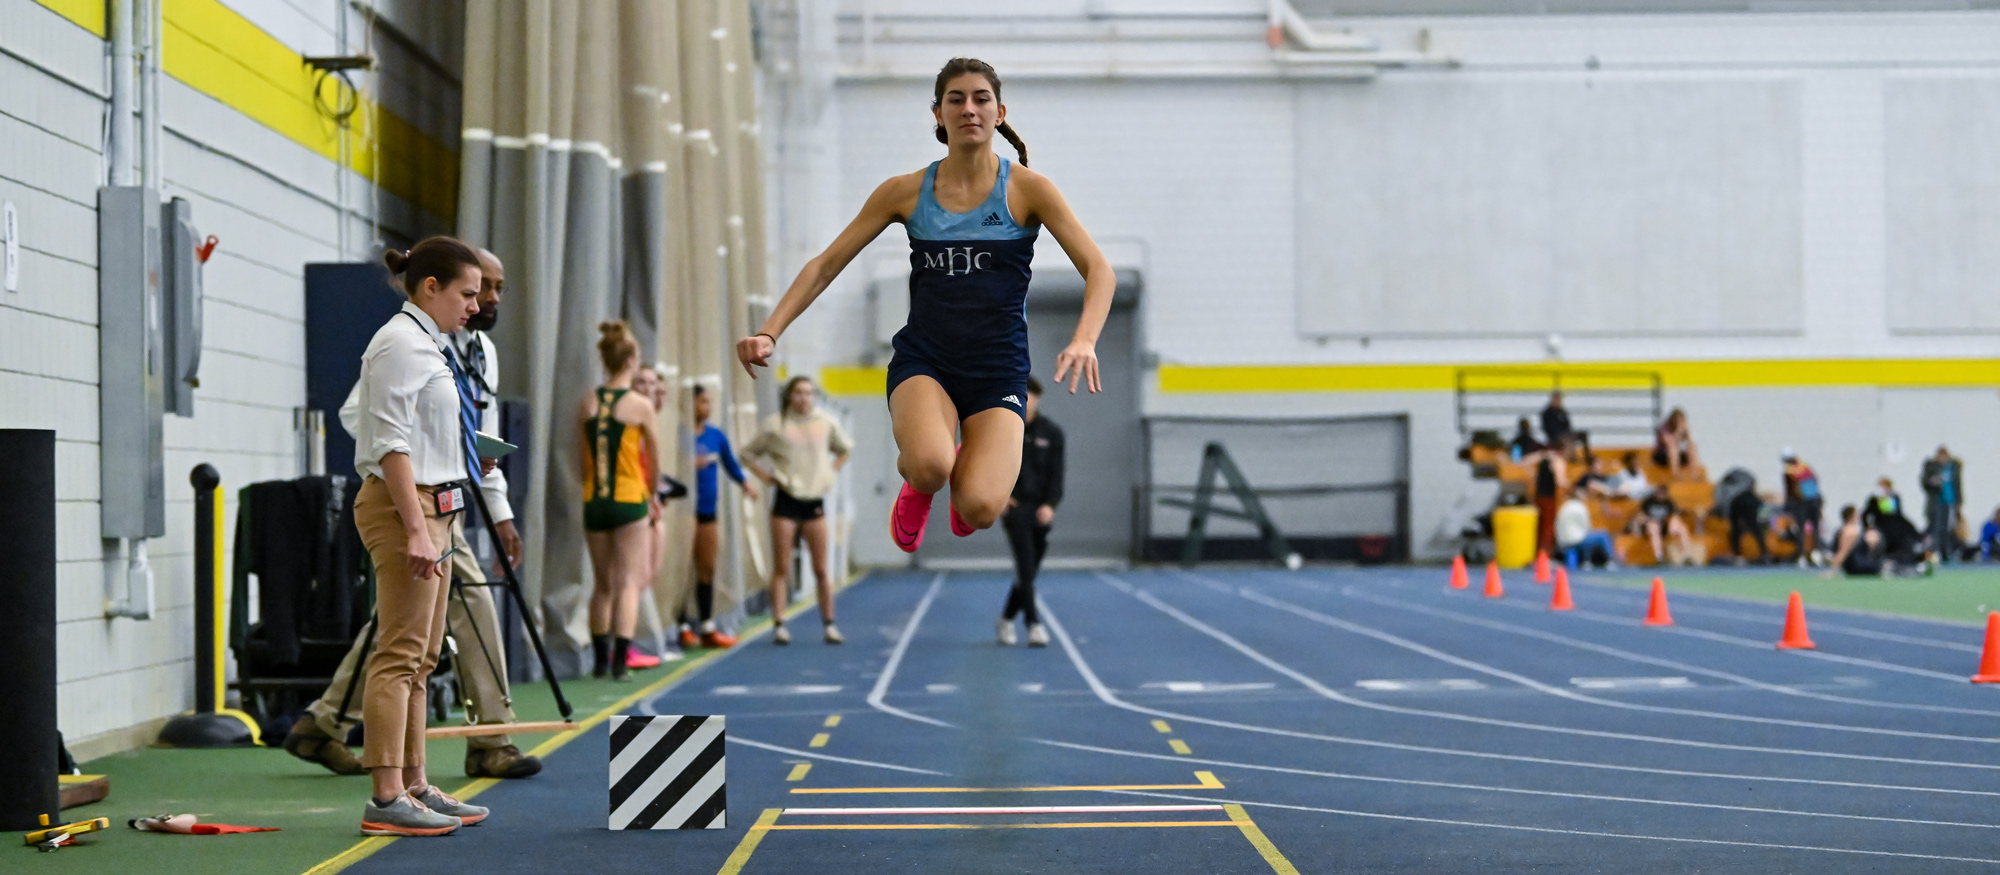 Ioanna Tsoni placed among the top 15 in three events (60 hurdles, triple jump, long jump) at the New England Division III Indoor Track & Field Championships in Boston on Feb. 25, 2024. (RJB Sports file photo)